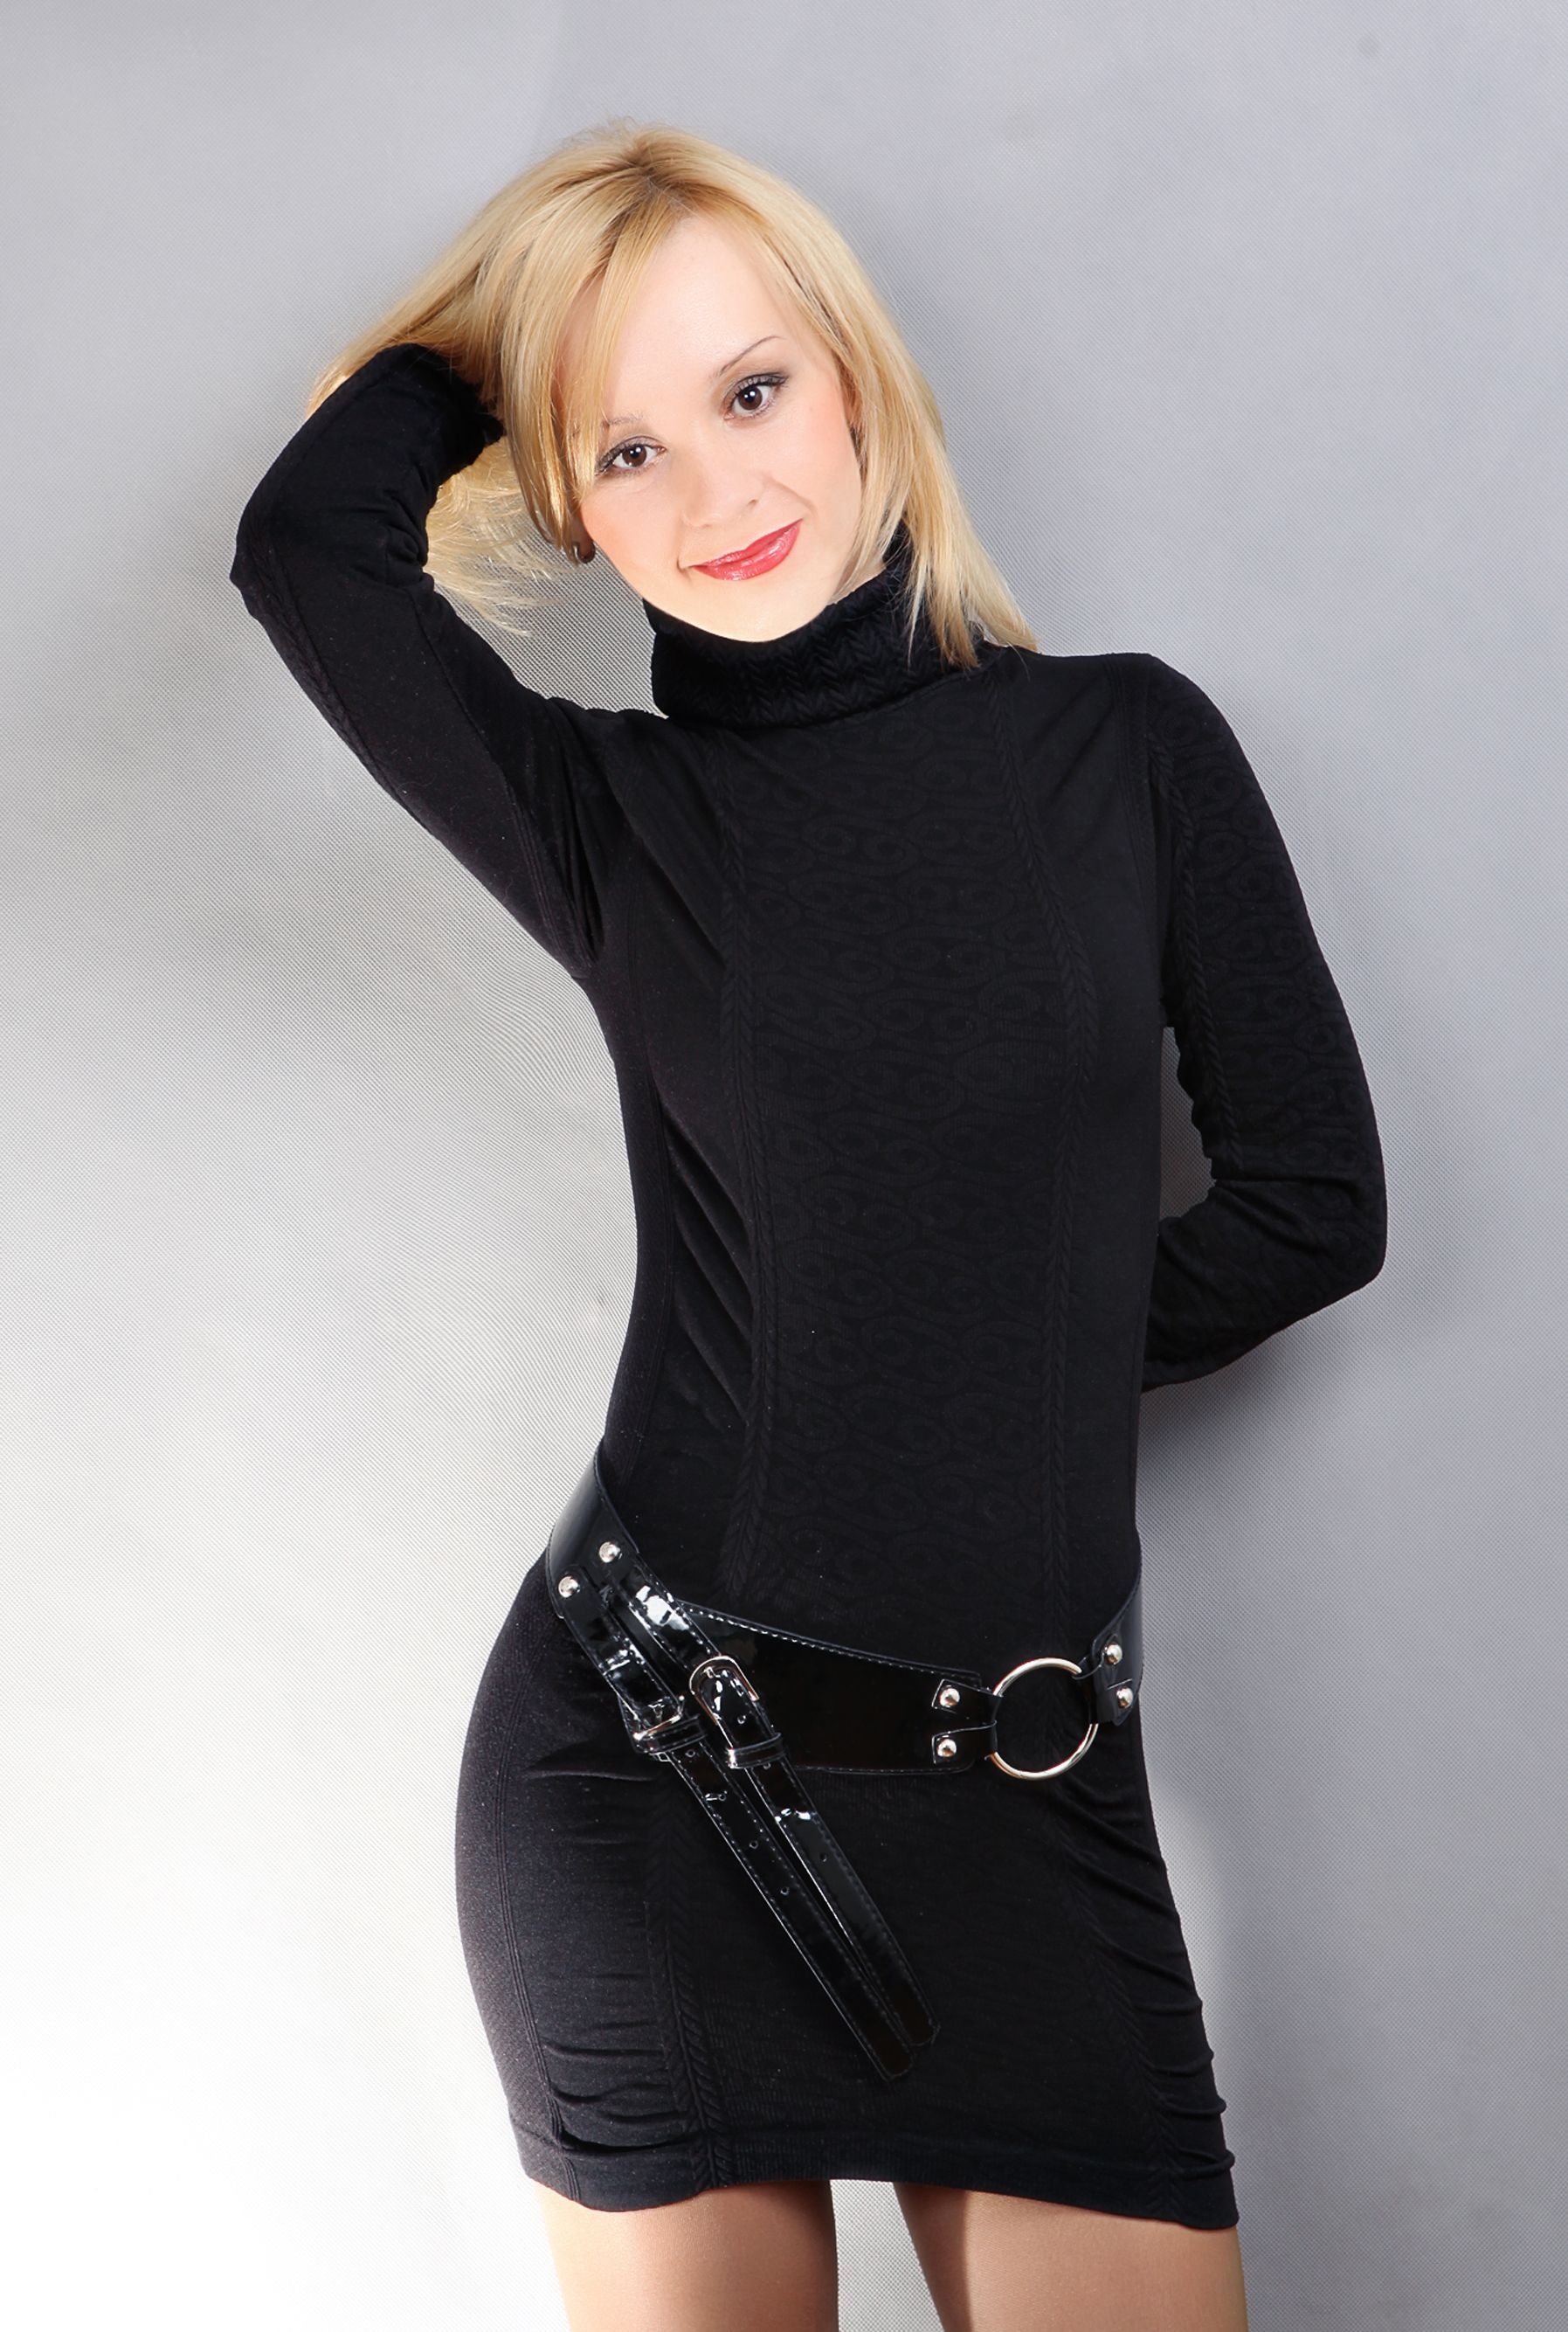 Dating Service Russian Ladies 43